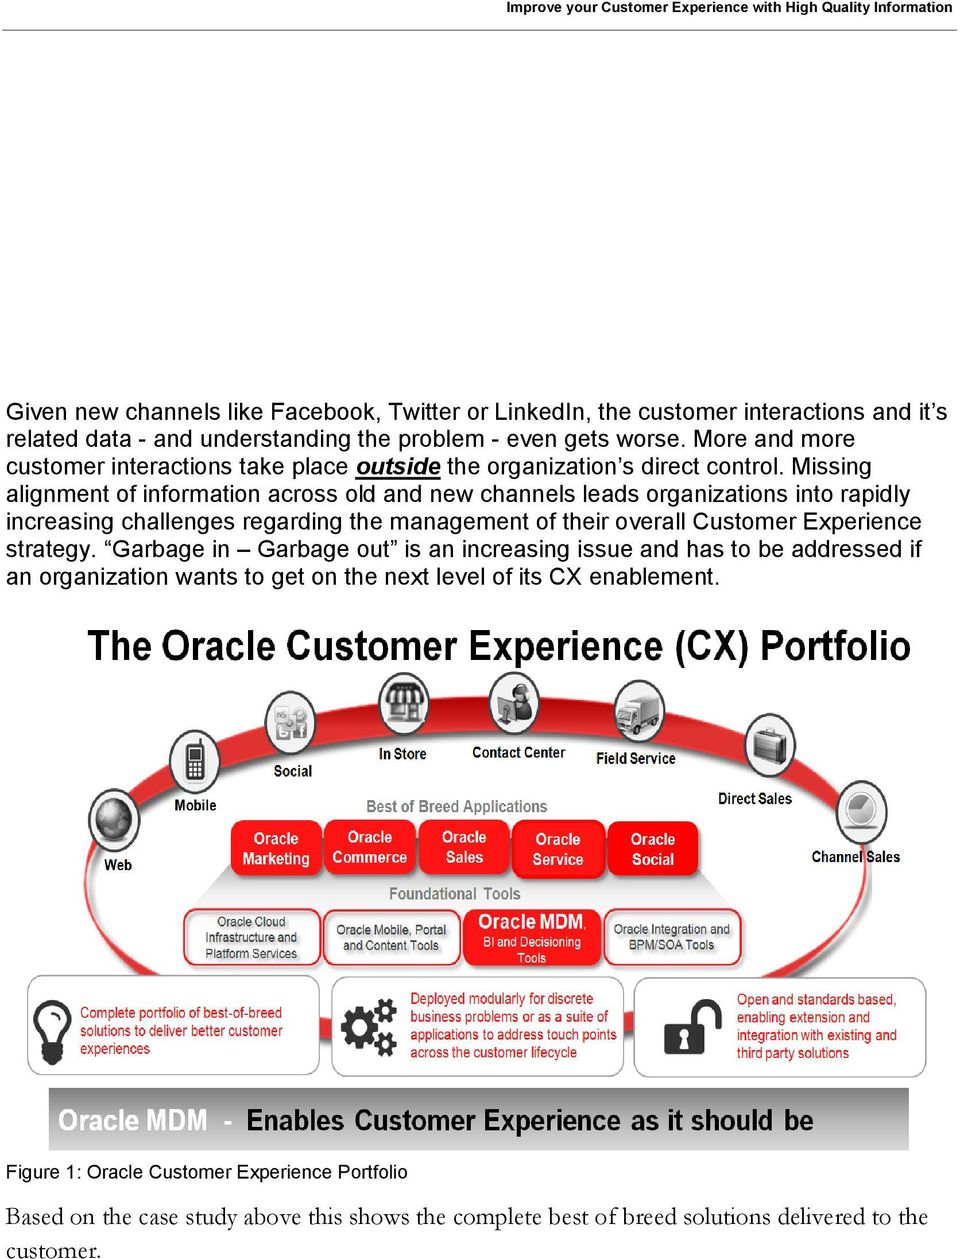 Missing alignment of information across old and new channels leads organizations into rapidly increasing challenges regarding the management of their overall Customer Experience